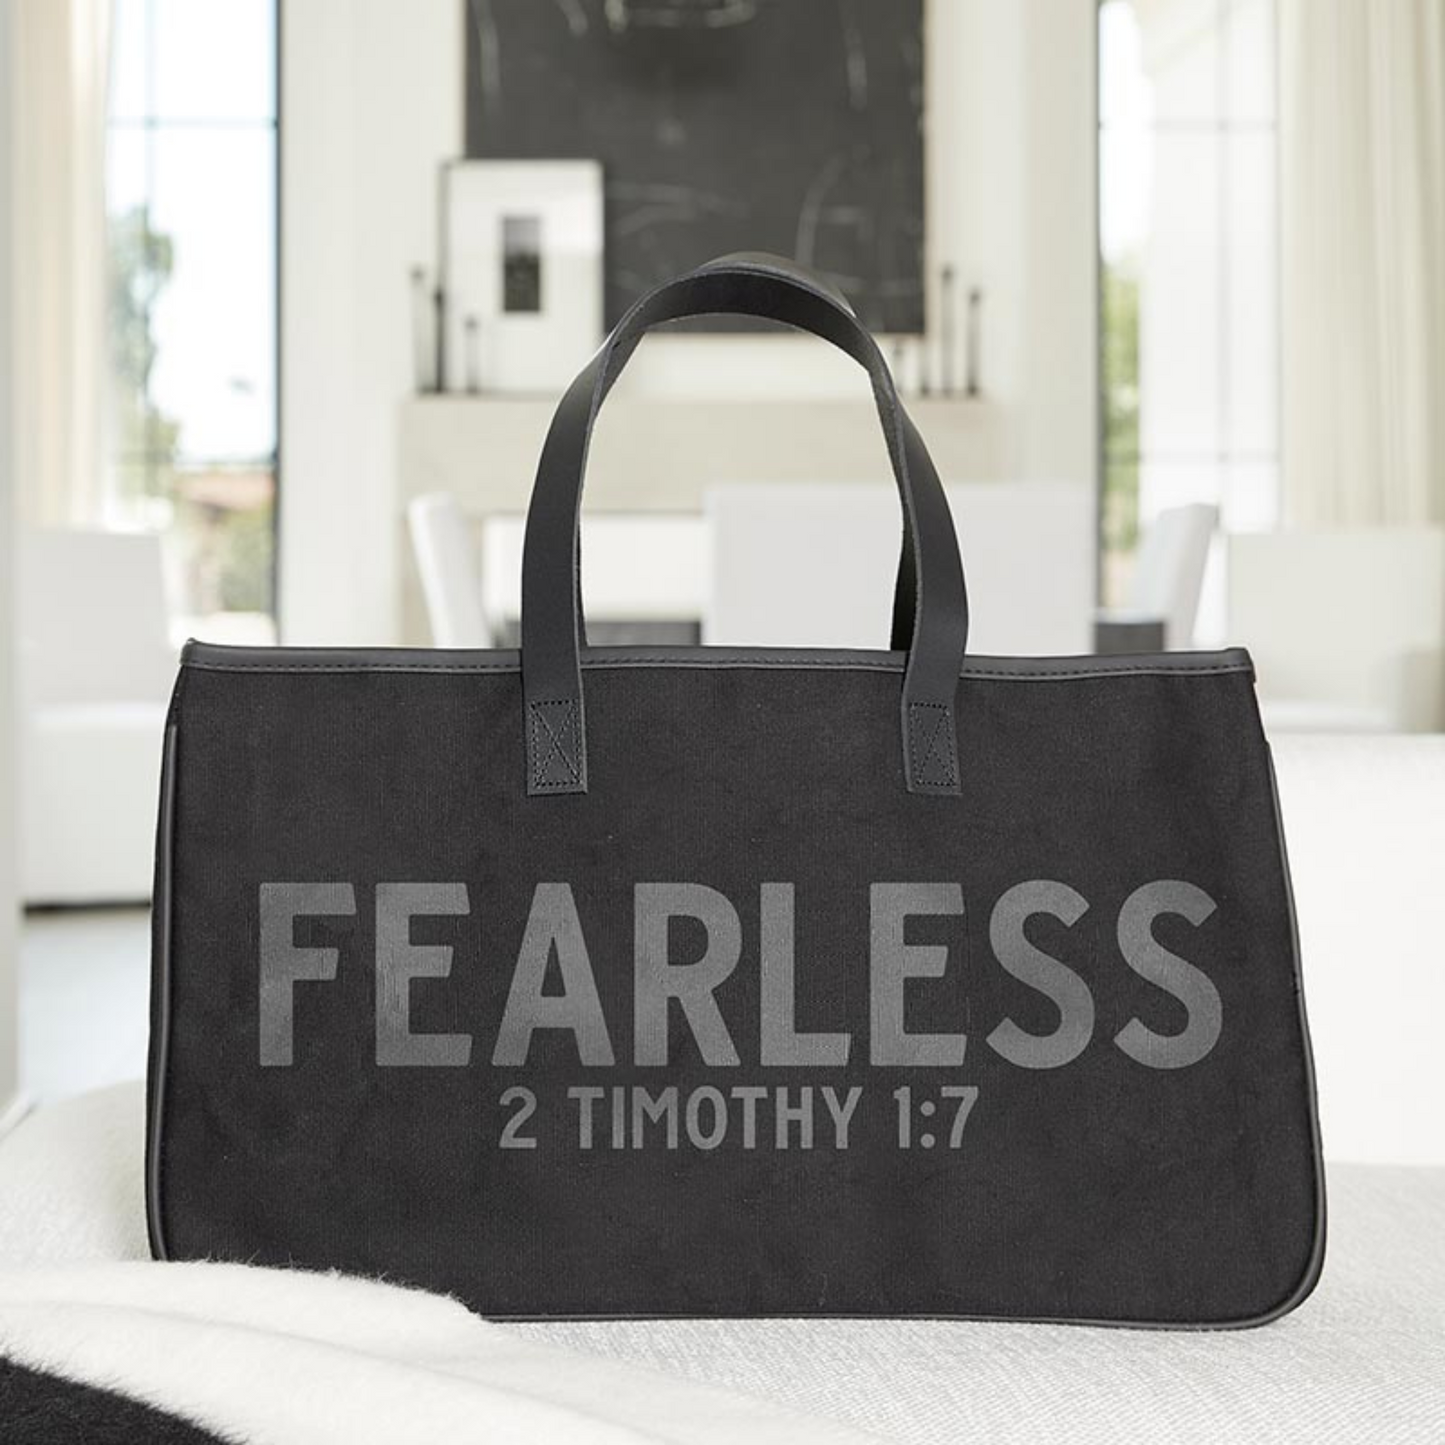 Large Canvas Tote - Blessed